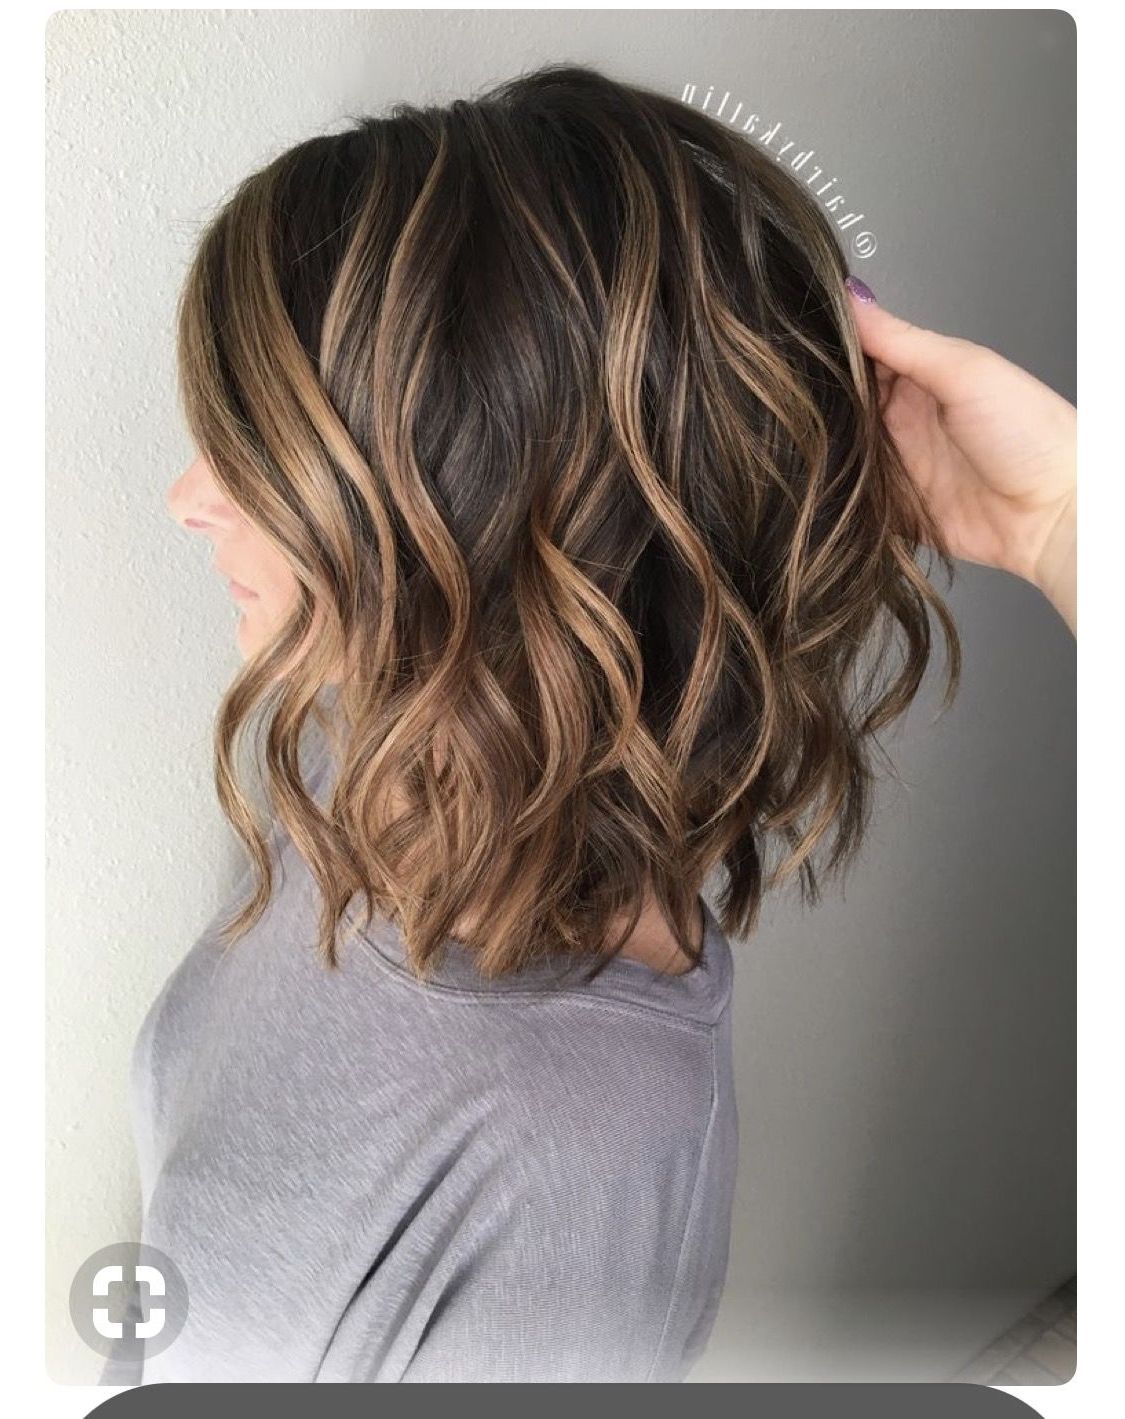 Pinsuzie Huffman On Hair | Pinterest | Hair Style, Hair Coloring Throughout Most Recent Shaggy Pixie Haircuts With Balayage Highlights (Photo 4 of 15)